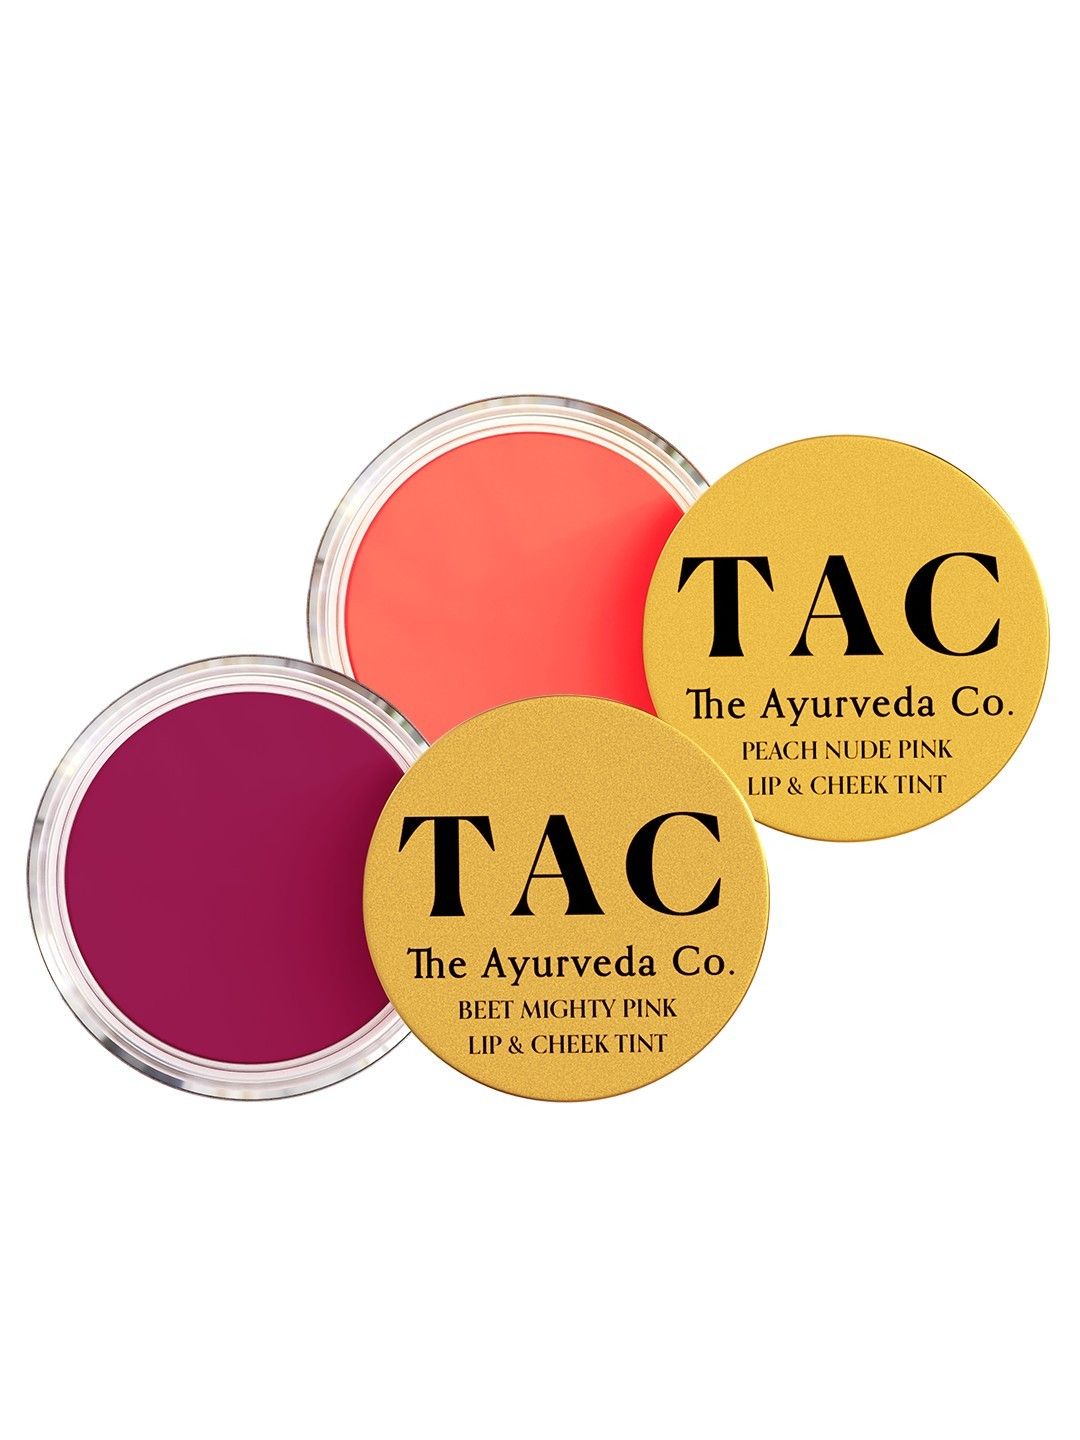 TAC - The Ayurveda Co. Beetroot & Peach Tinted Lip Balm with Shea Butter & Orange Oil Price in India